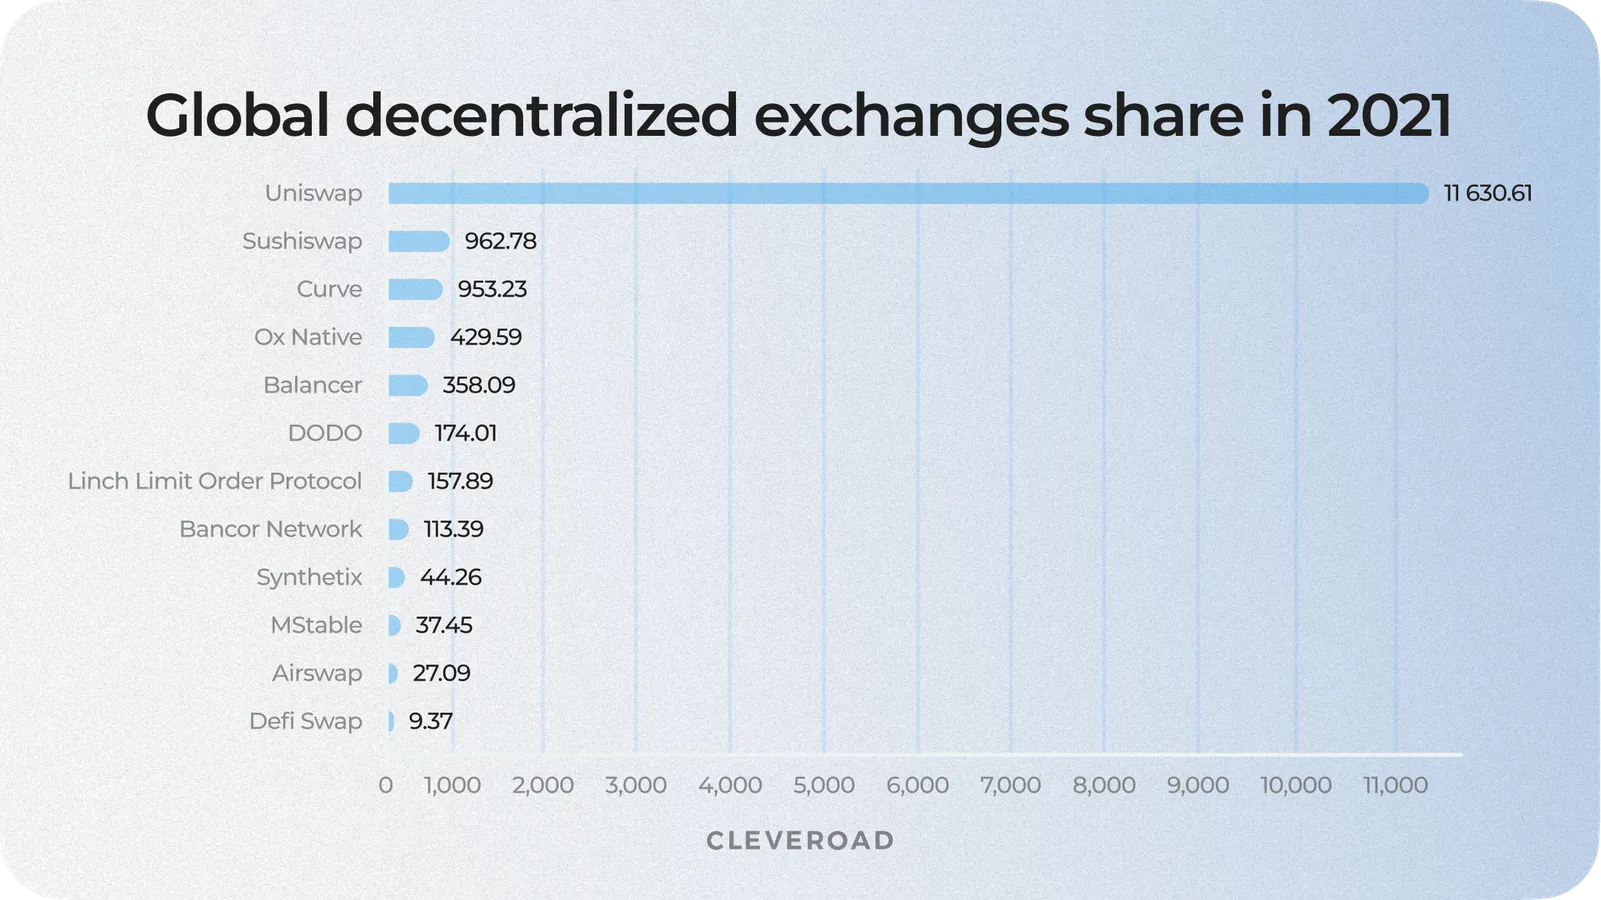 Global decentralized exchanges share in 2021